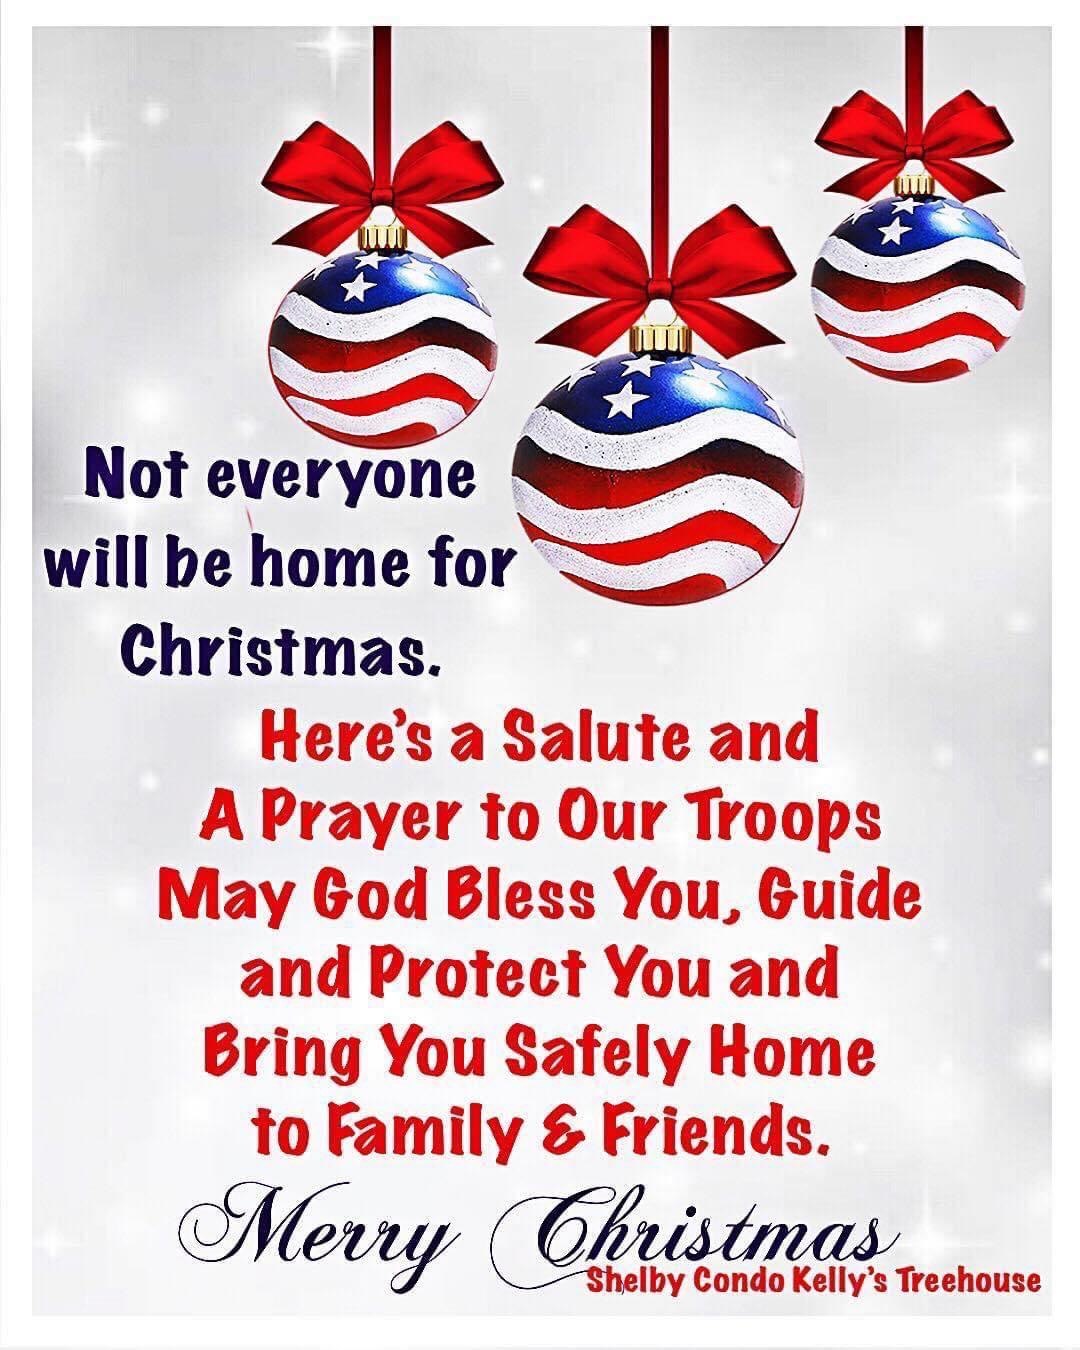 Happy Christmas to all our troops ✝️♥️